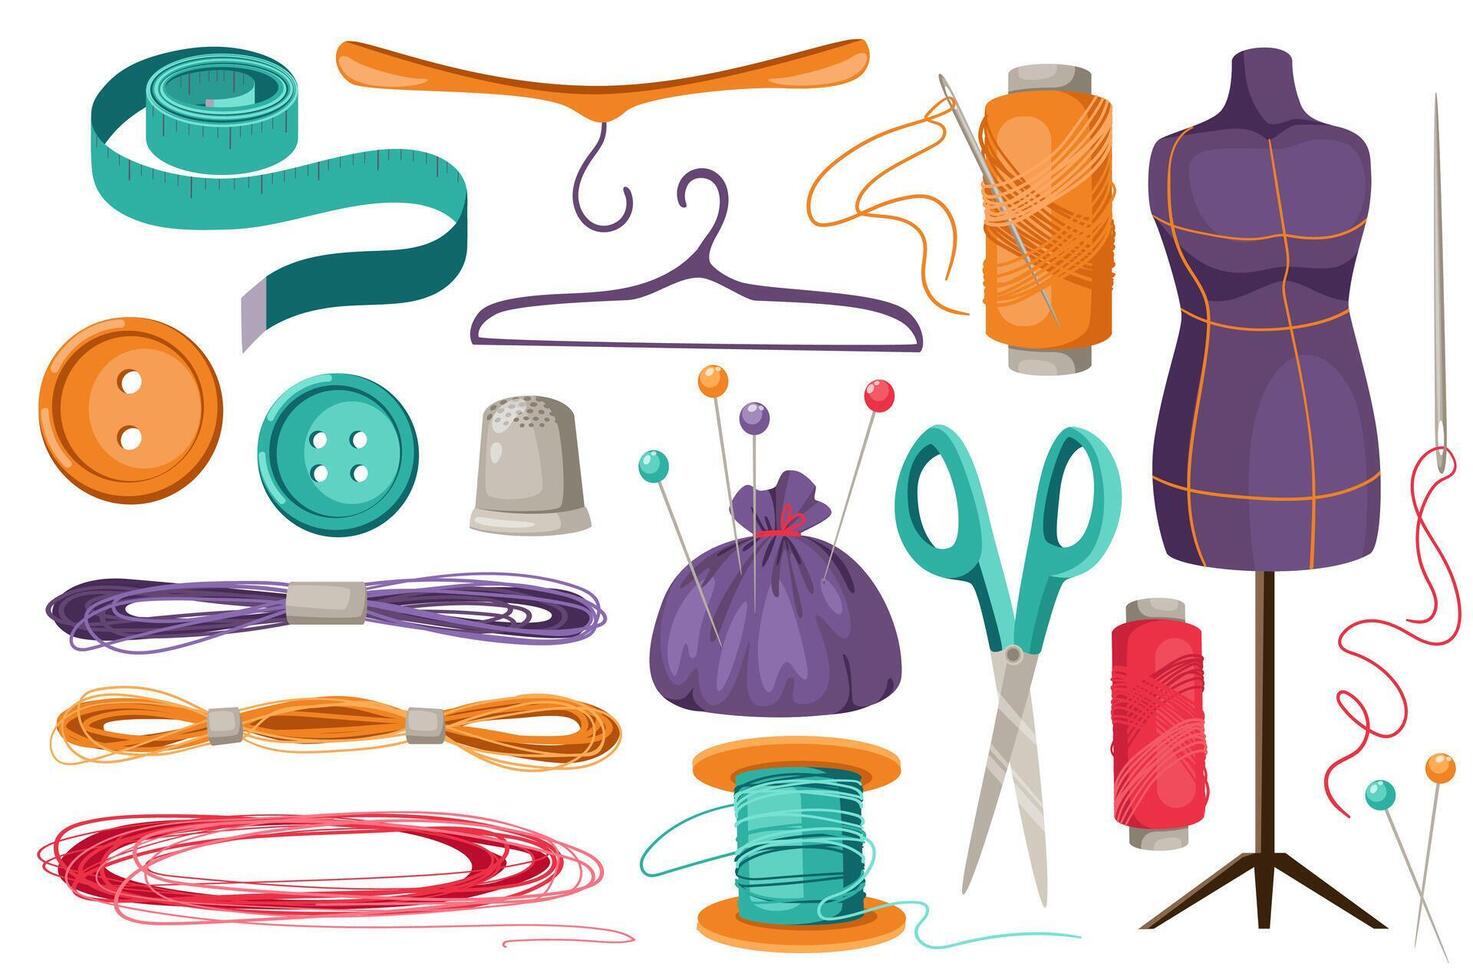 Sewing tools set graphic elements in flat design. Bundle of measuring tape, hangers, spool thread, needles, mannequin, buttons, thimble, pins, scissors and other. Vector illustration isolated objects